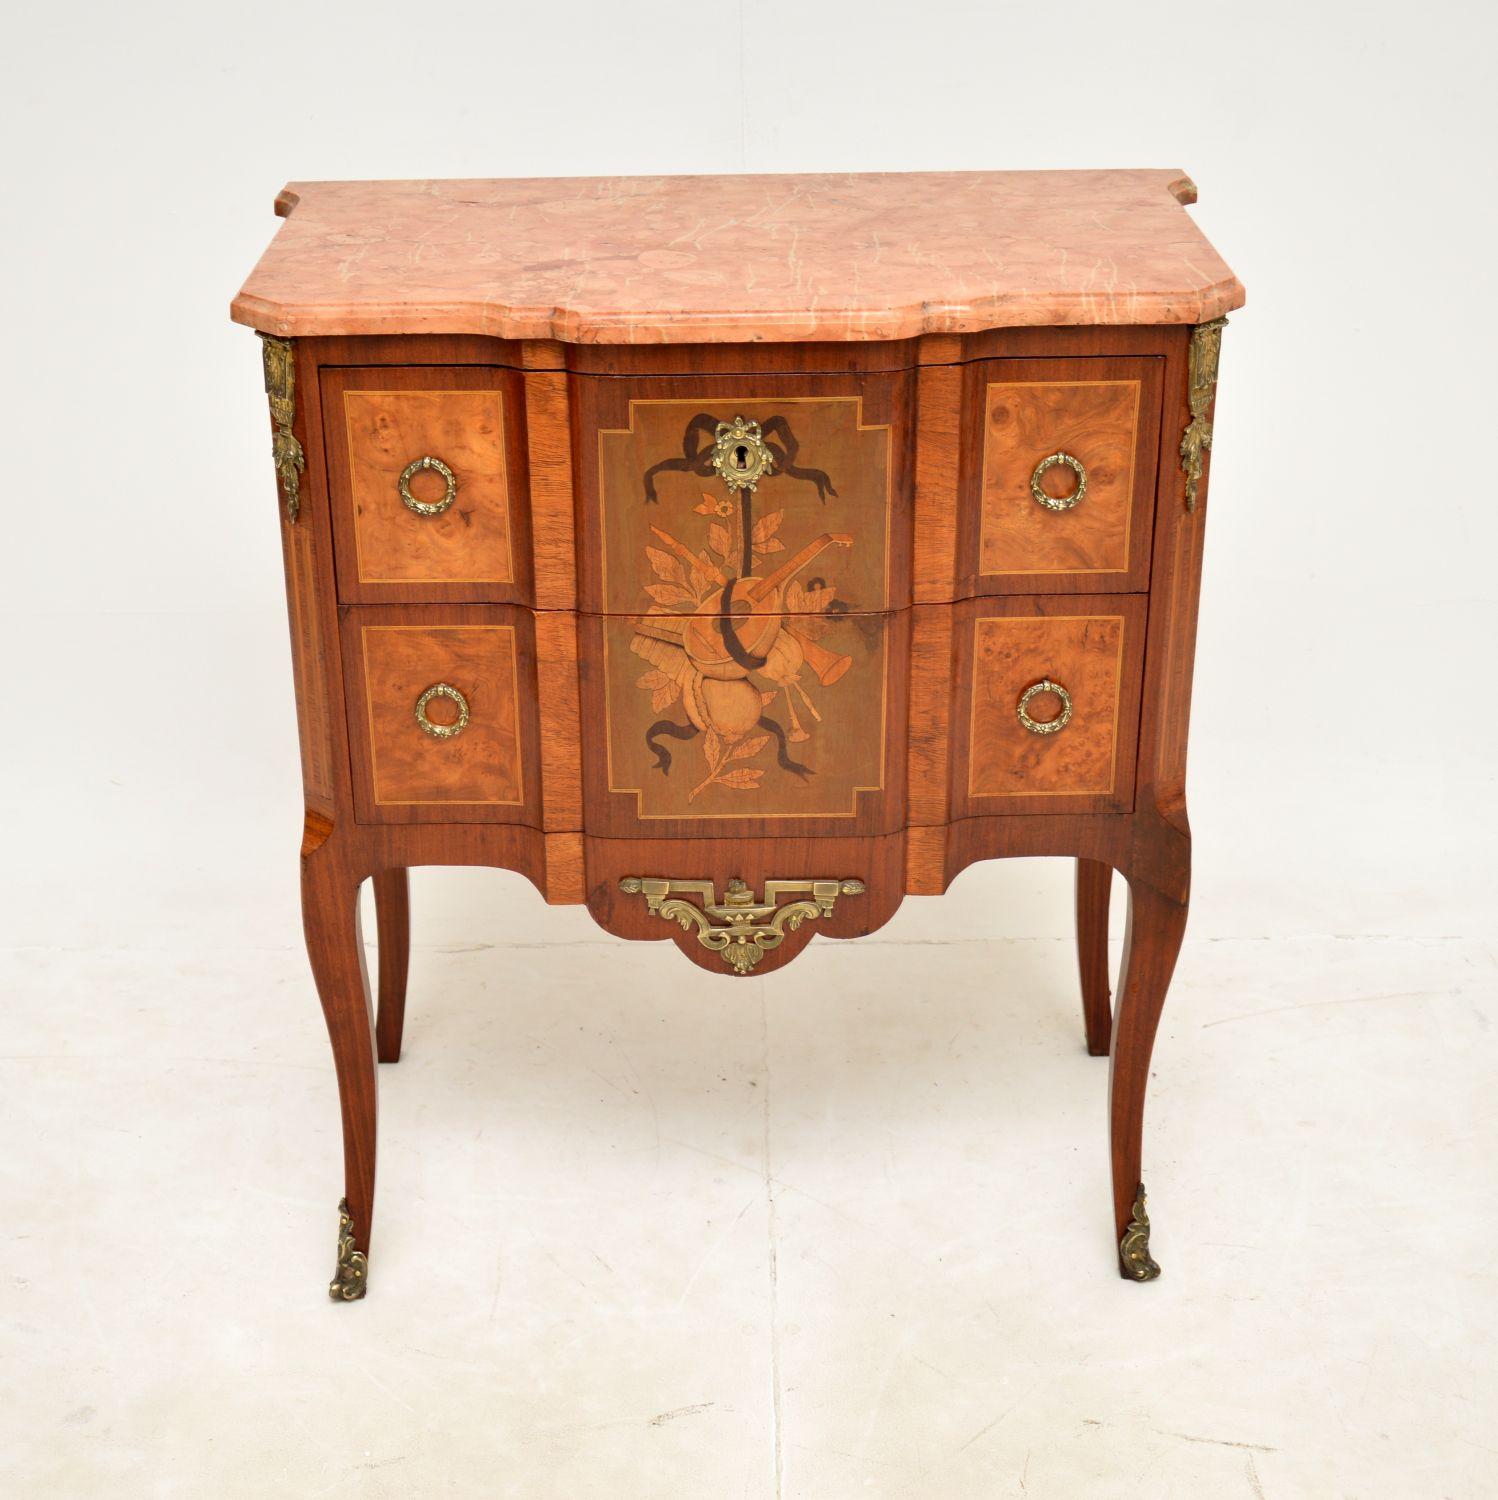 A stunning antique French commode with a marble top. This dates from around the 1880-1900 period.

It is of superb quality, it is predominantly burr walnut, with beautiful inlays of various woods and high quality gilt bronze mounts. The colour tones